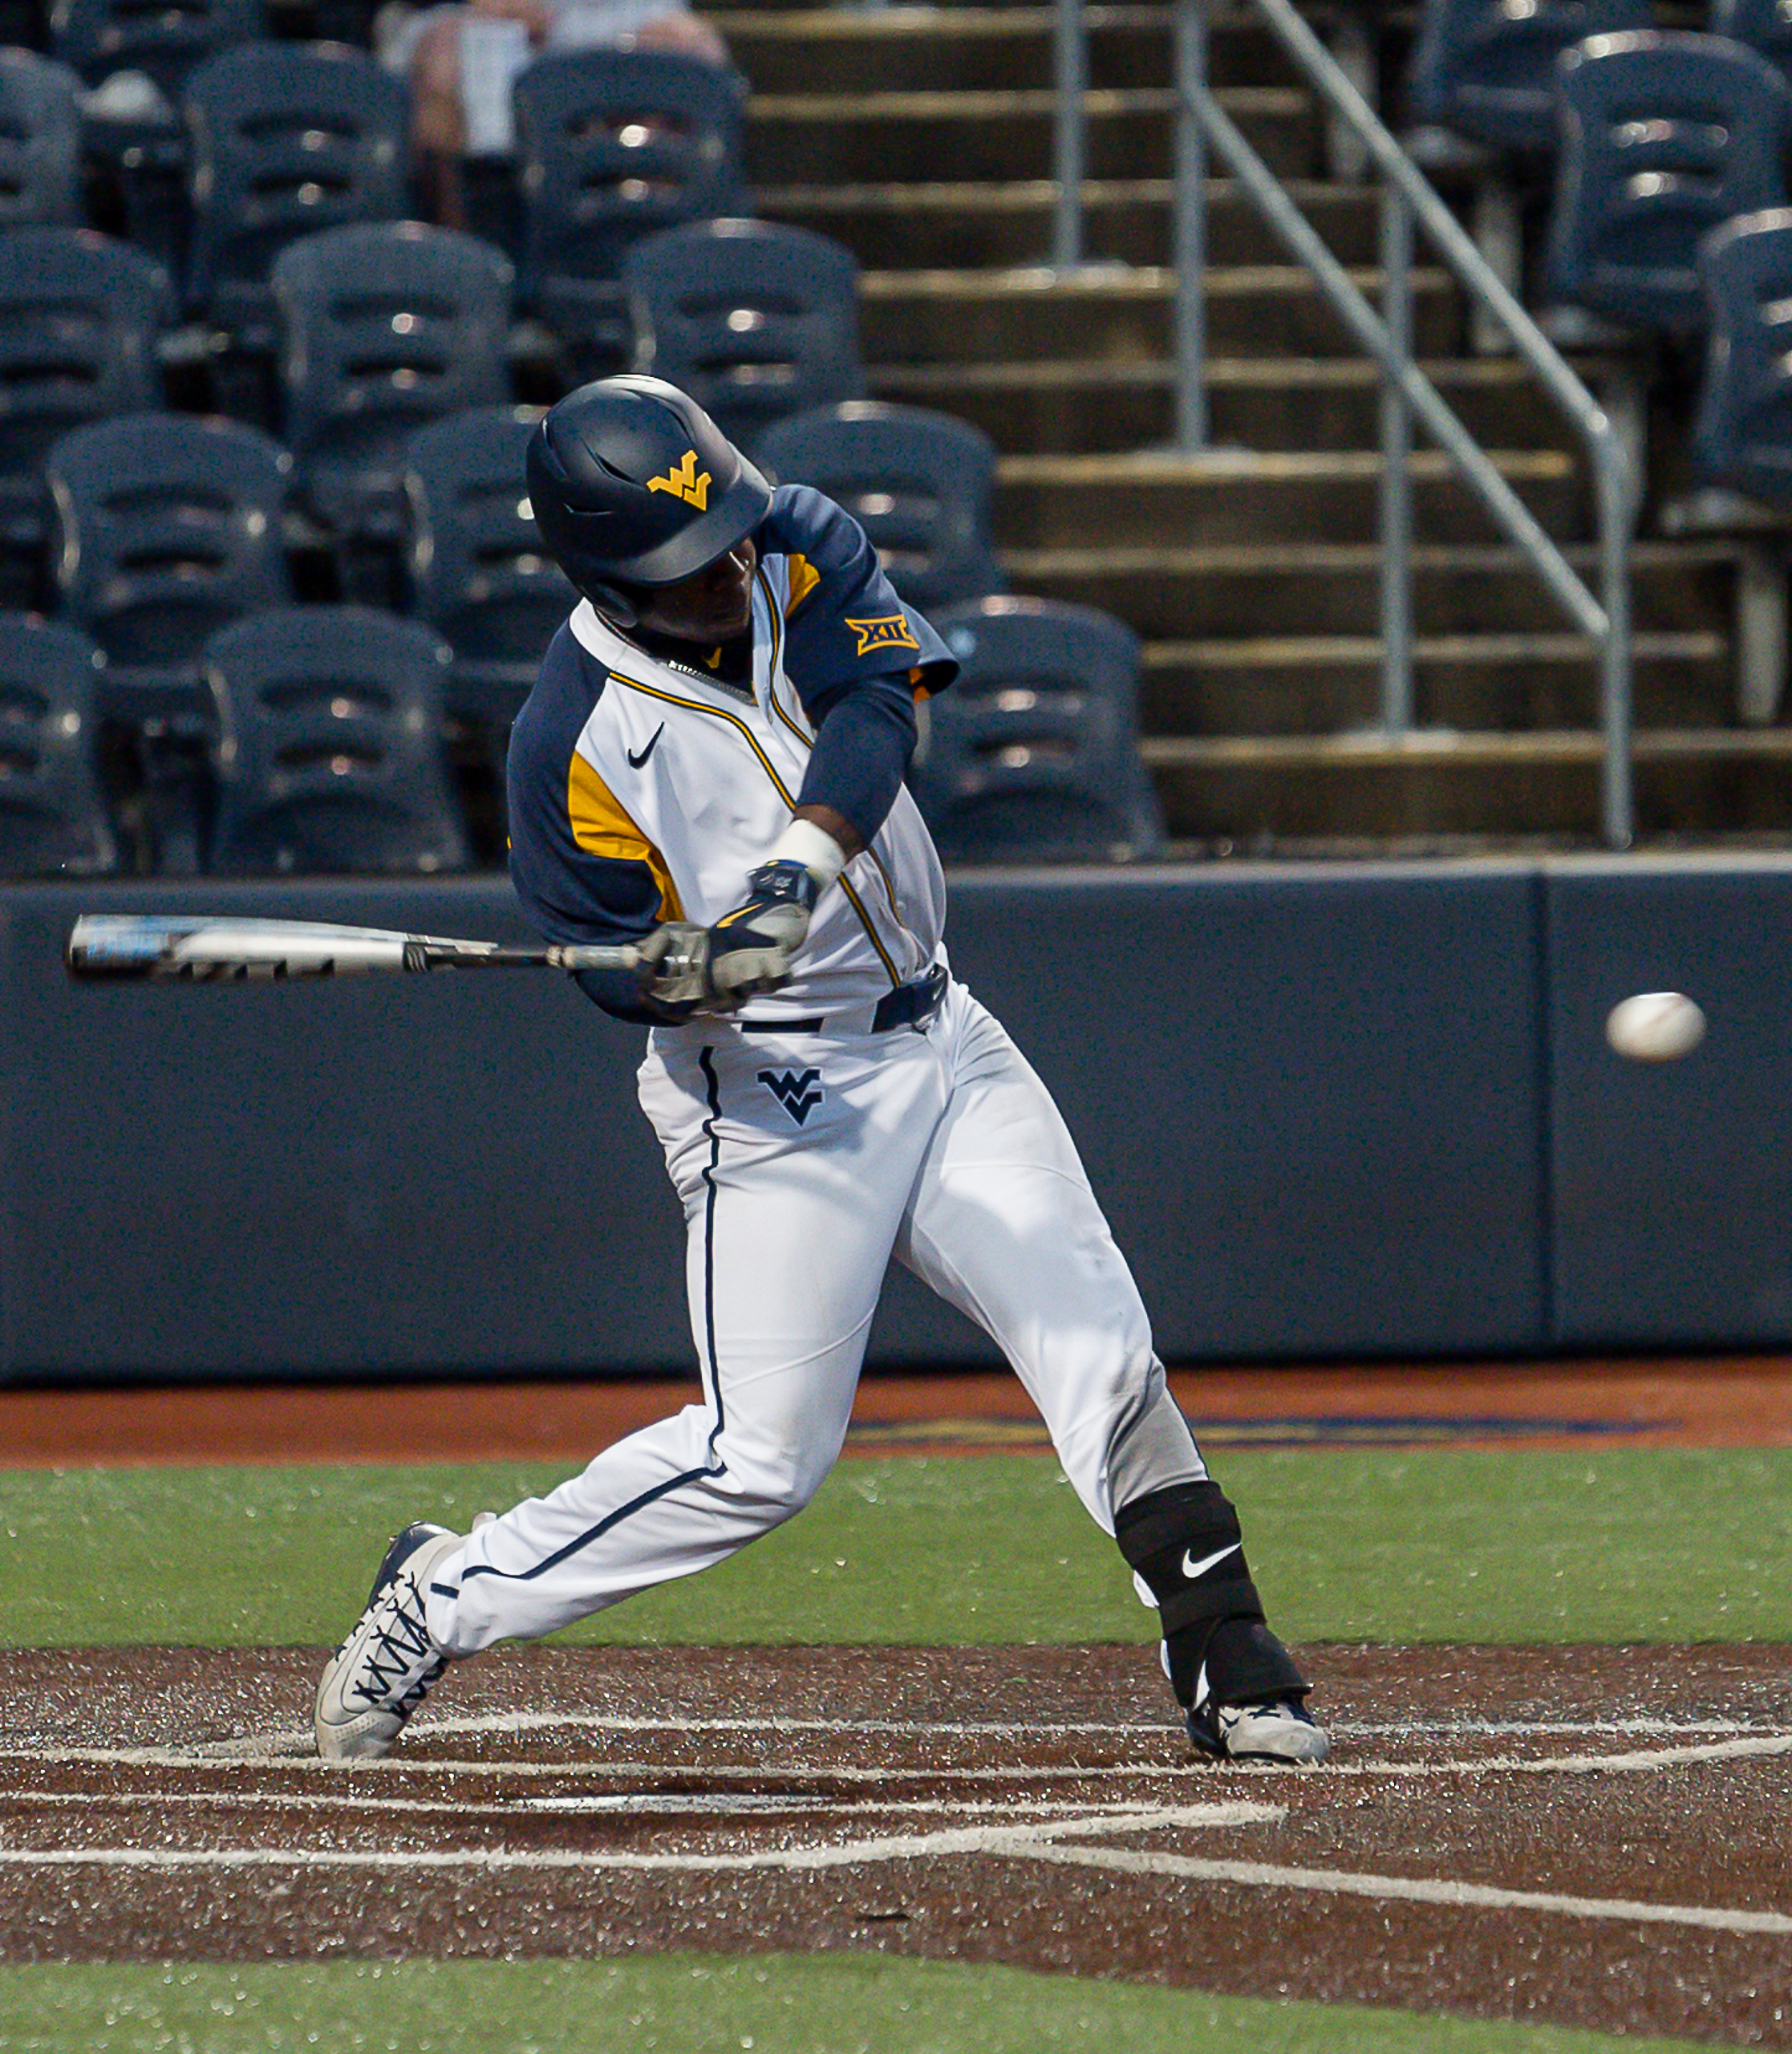 WVU baseball takes game two in back-and-forth against Kansas Jayhawks, 10-7, Baseball